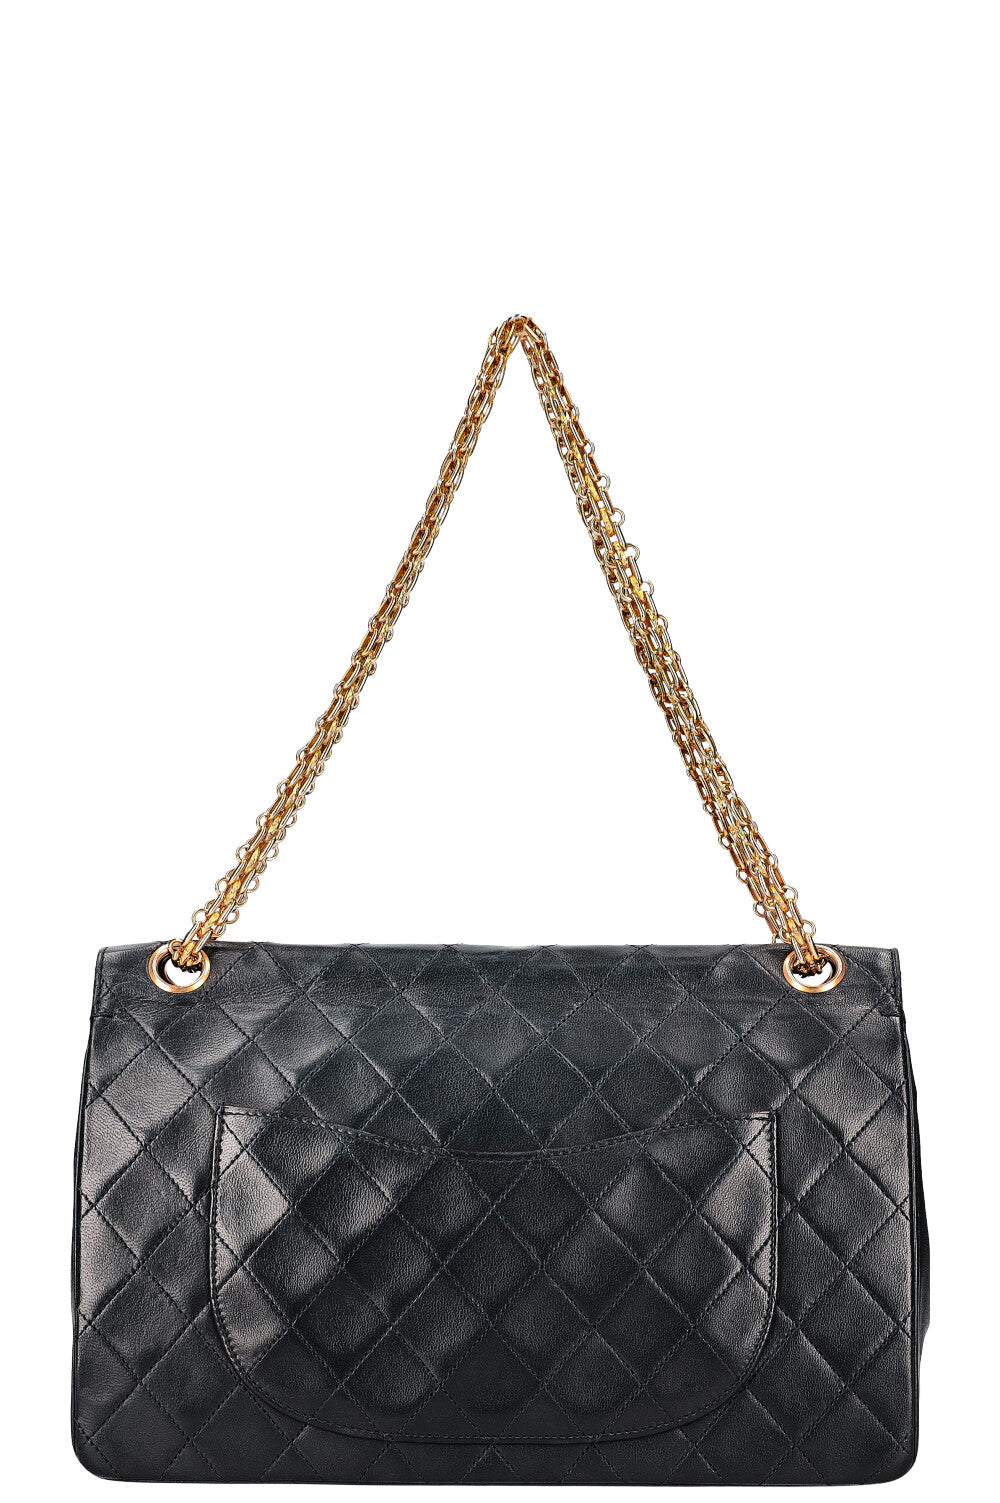 CHANEL Vintage Reissue Chain Double Flap Bag Midnight Blue